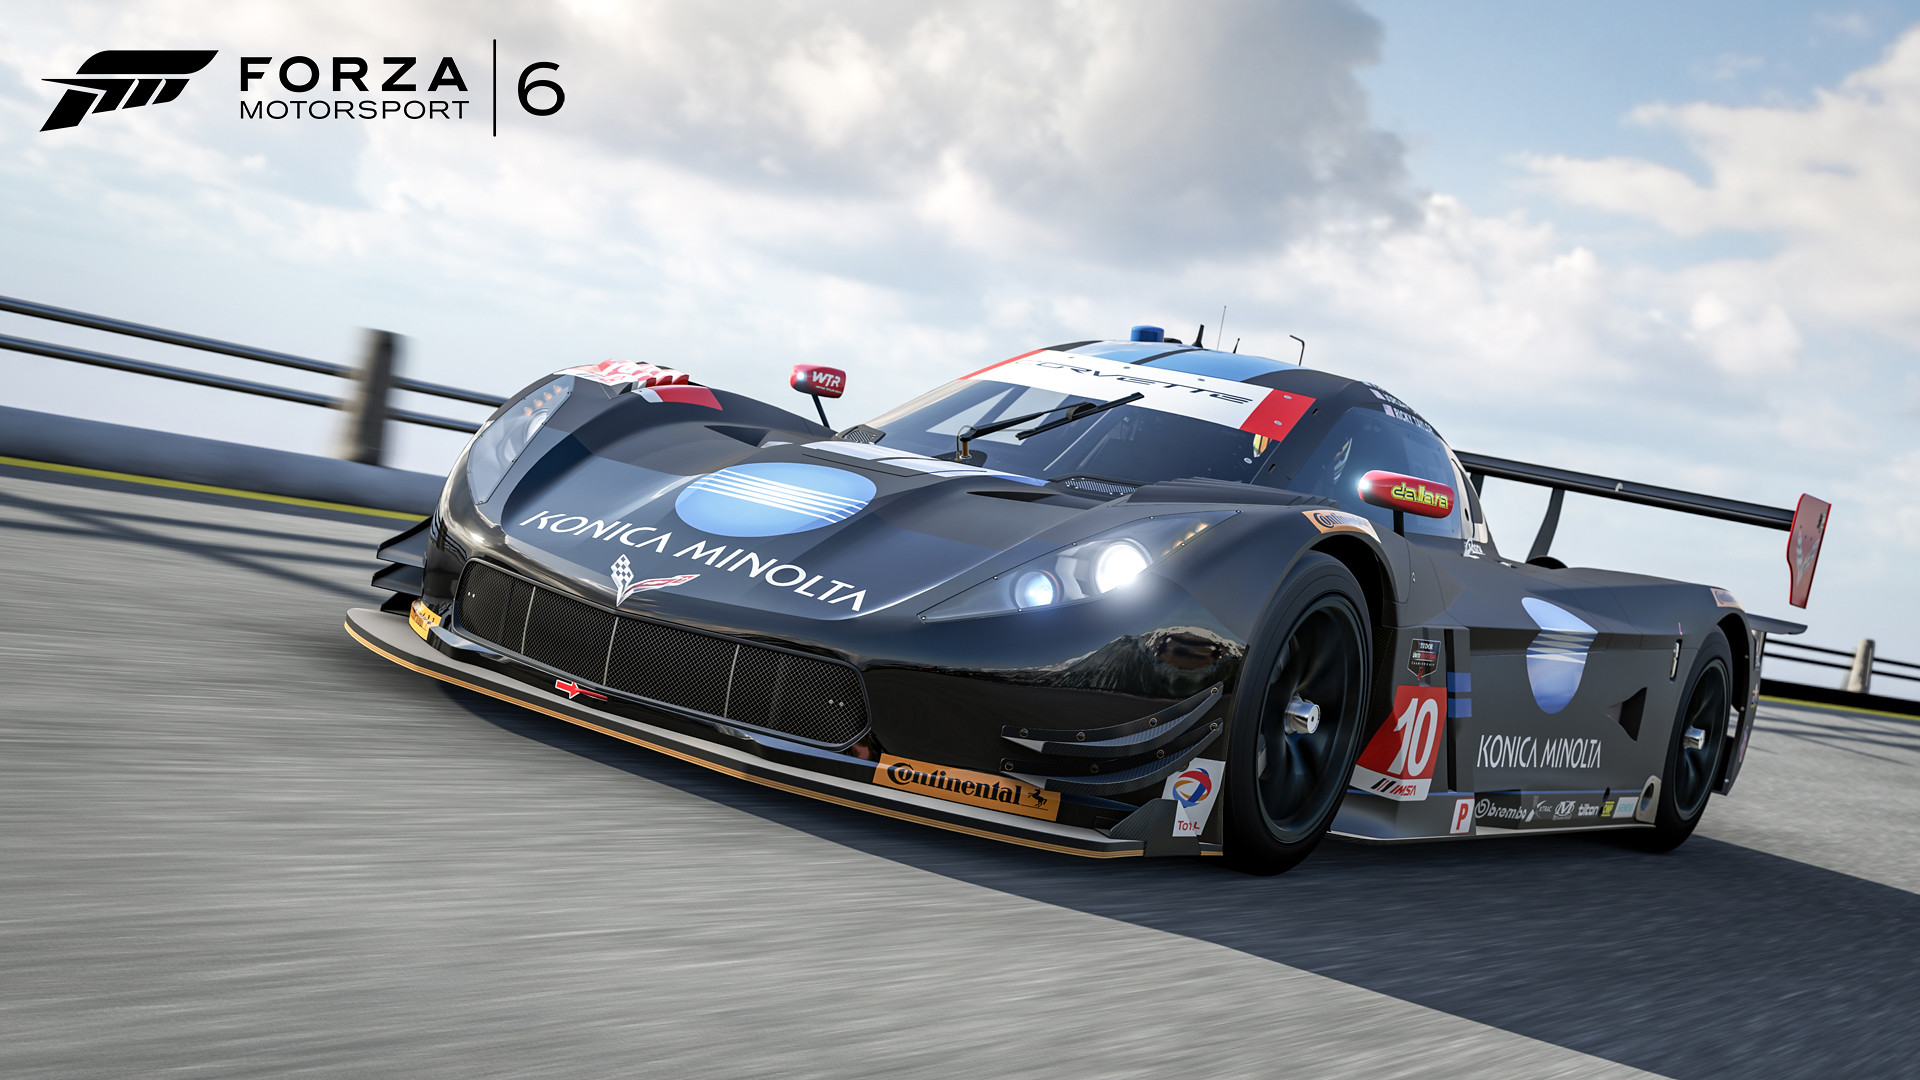 Forza Motorsport 6 Meguiars Car Pack Available Bsimracing